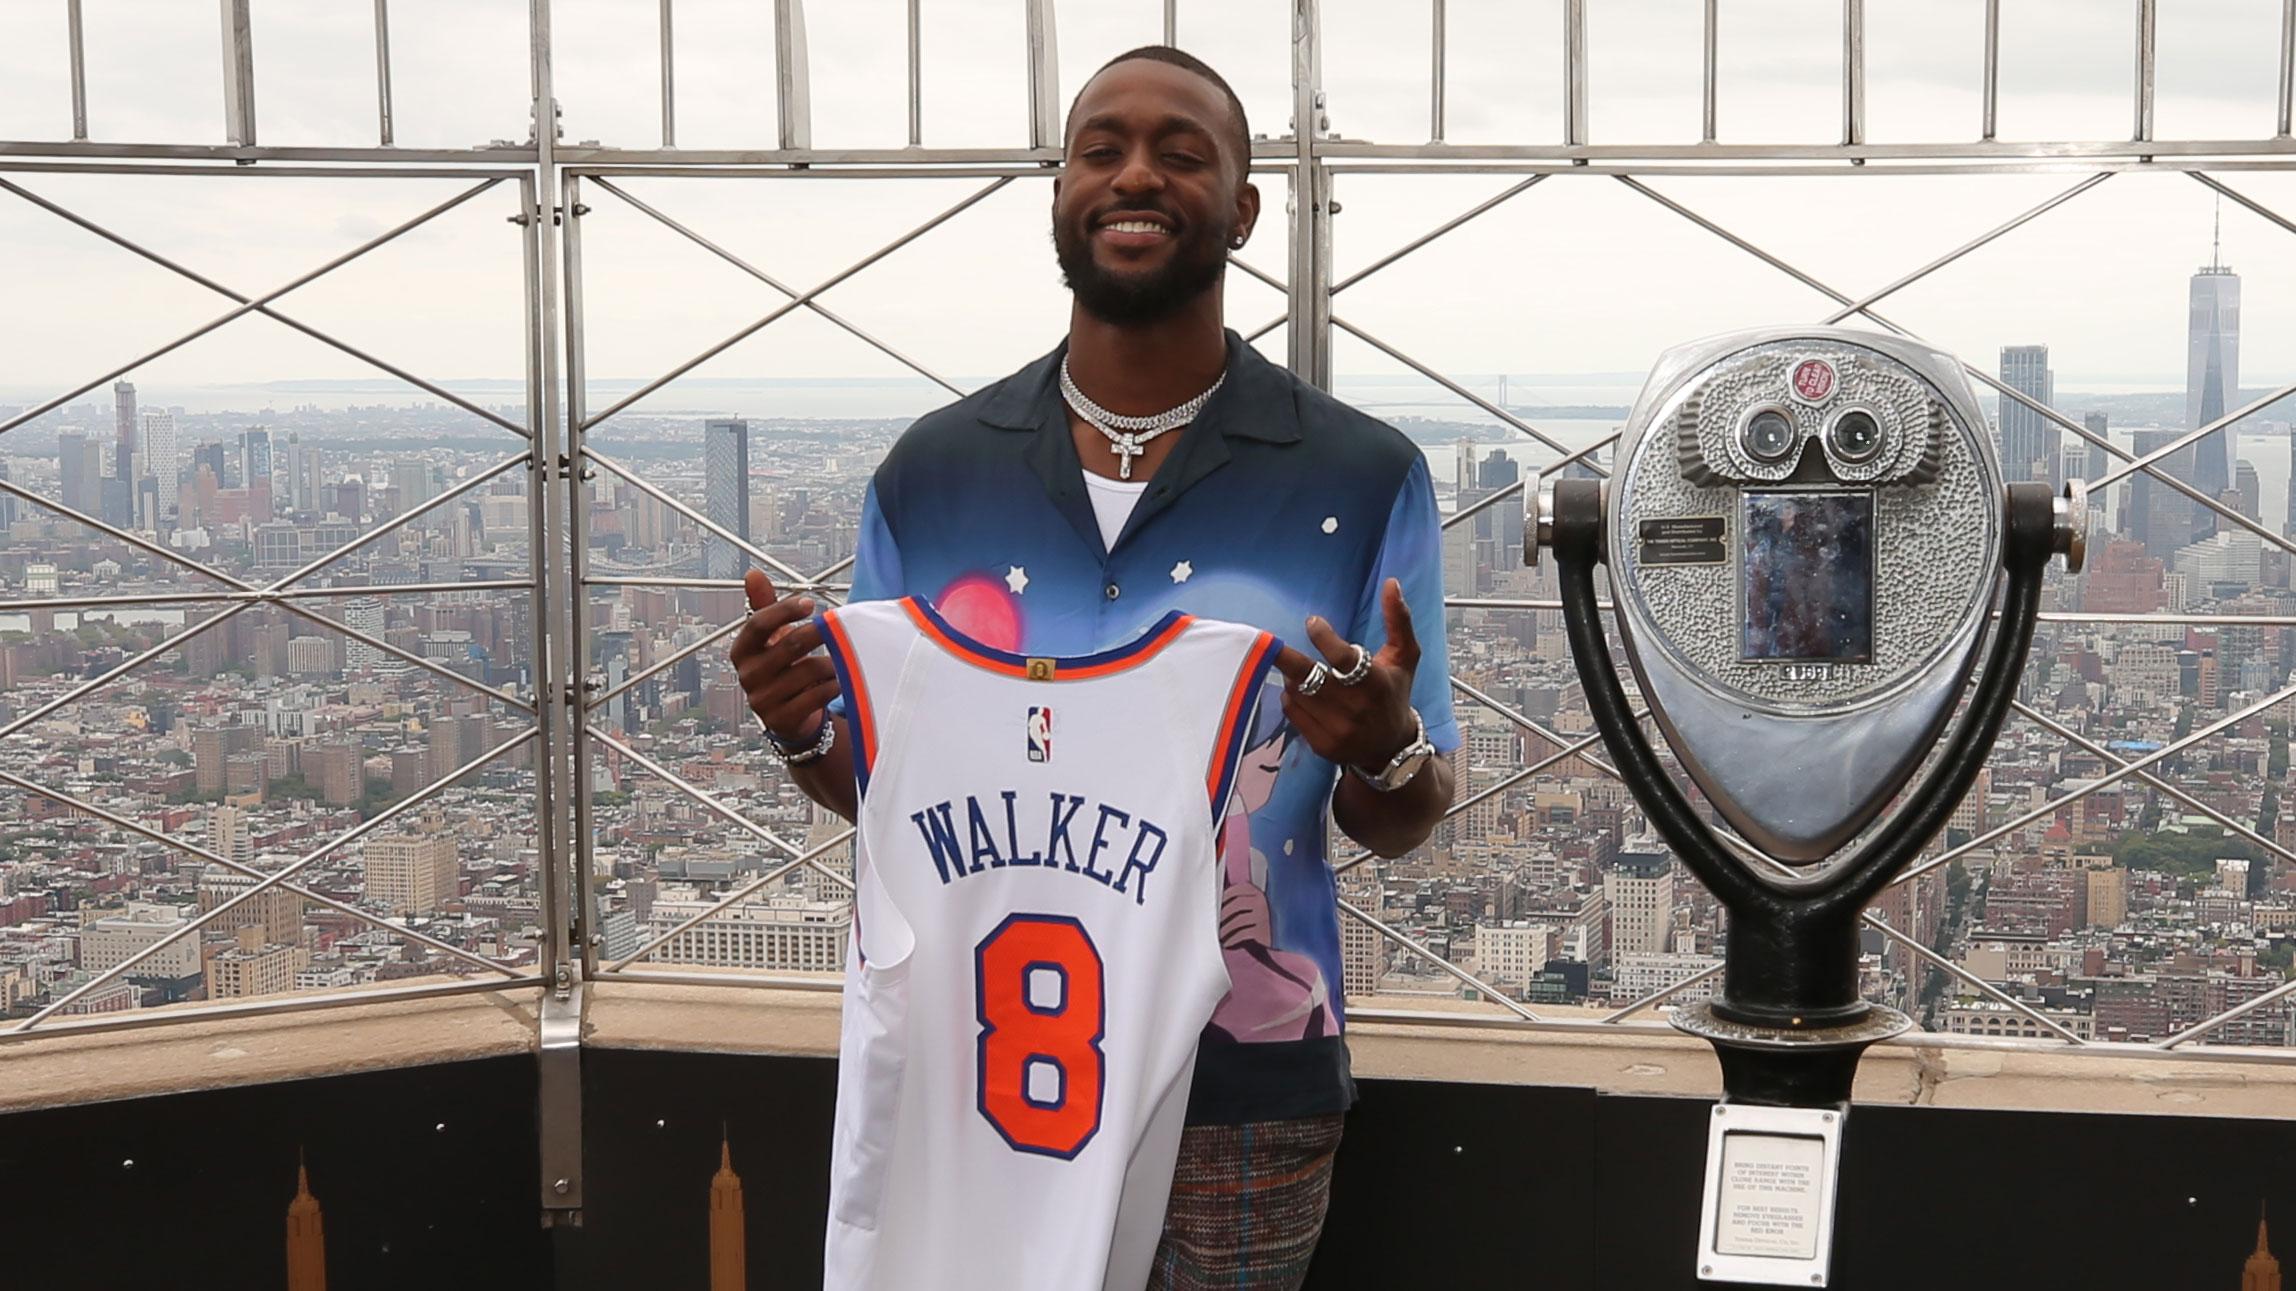 Aug 17, 2021; New York, New York, USA; New York Knicks guard Kemba Walker (8) poses for a photo during a photo shoot on the 86th floor observation deck of the Empire State Building. / Brad Penner-USA TODAY Sports